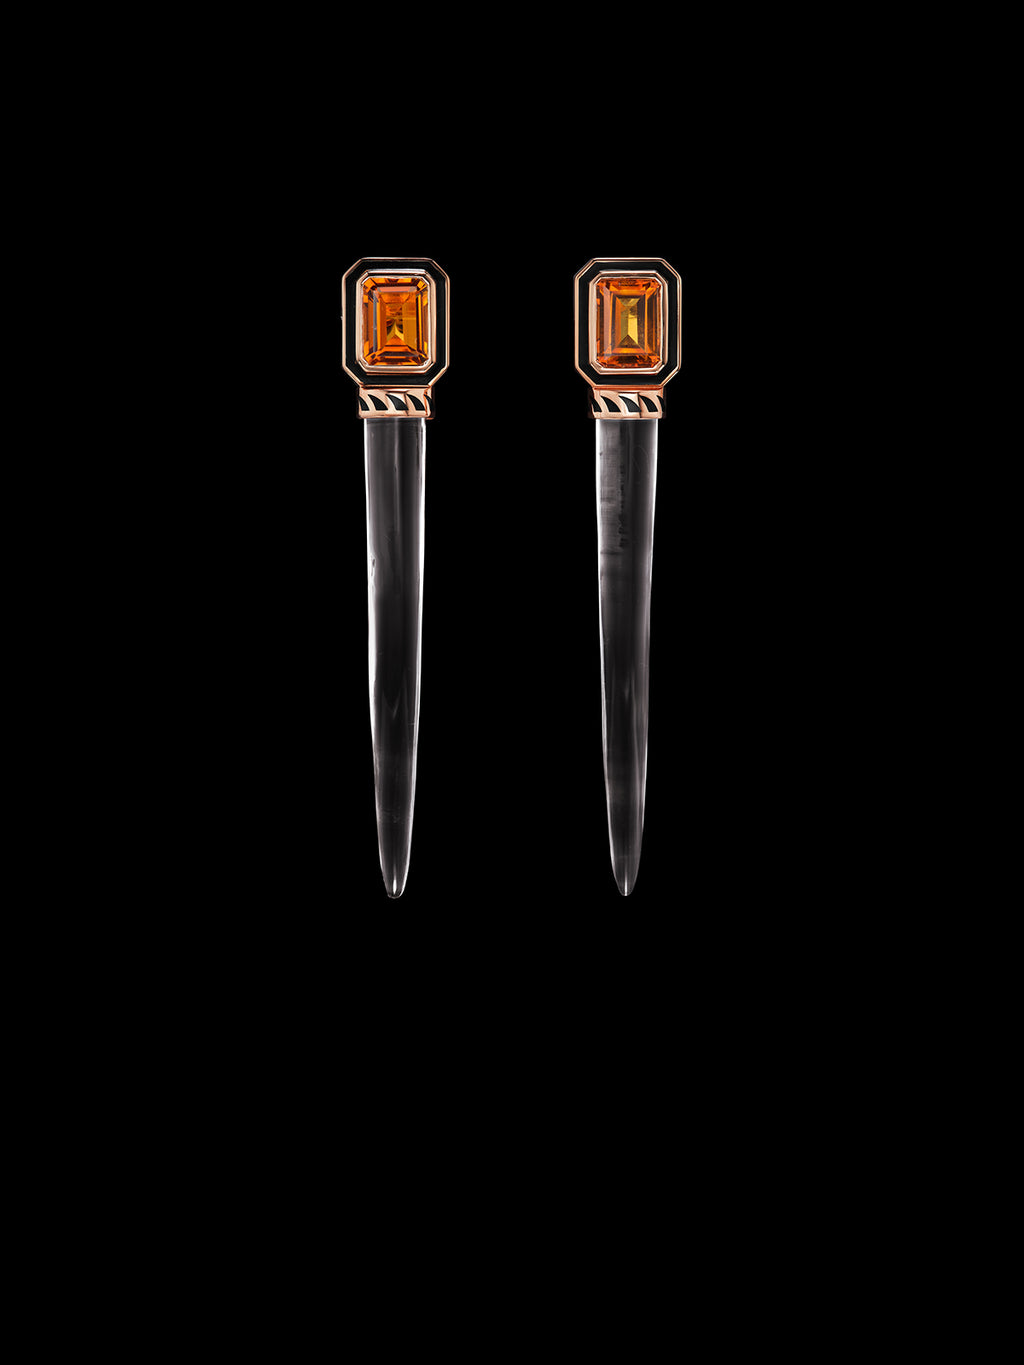 Carved Crystal Tusk Earrings with Citrine